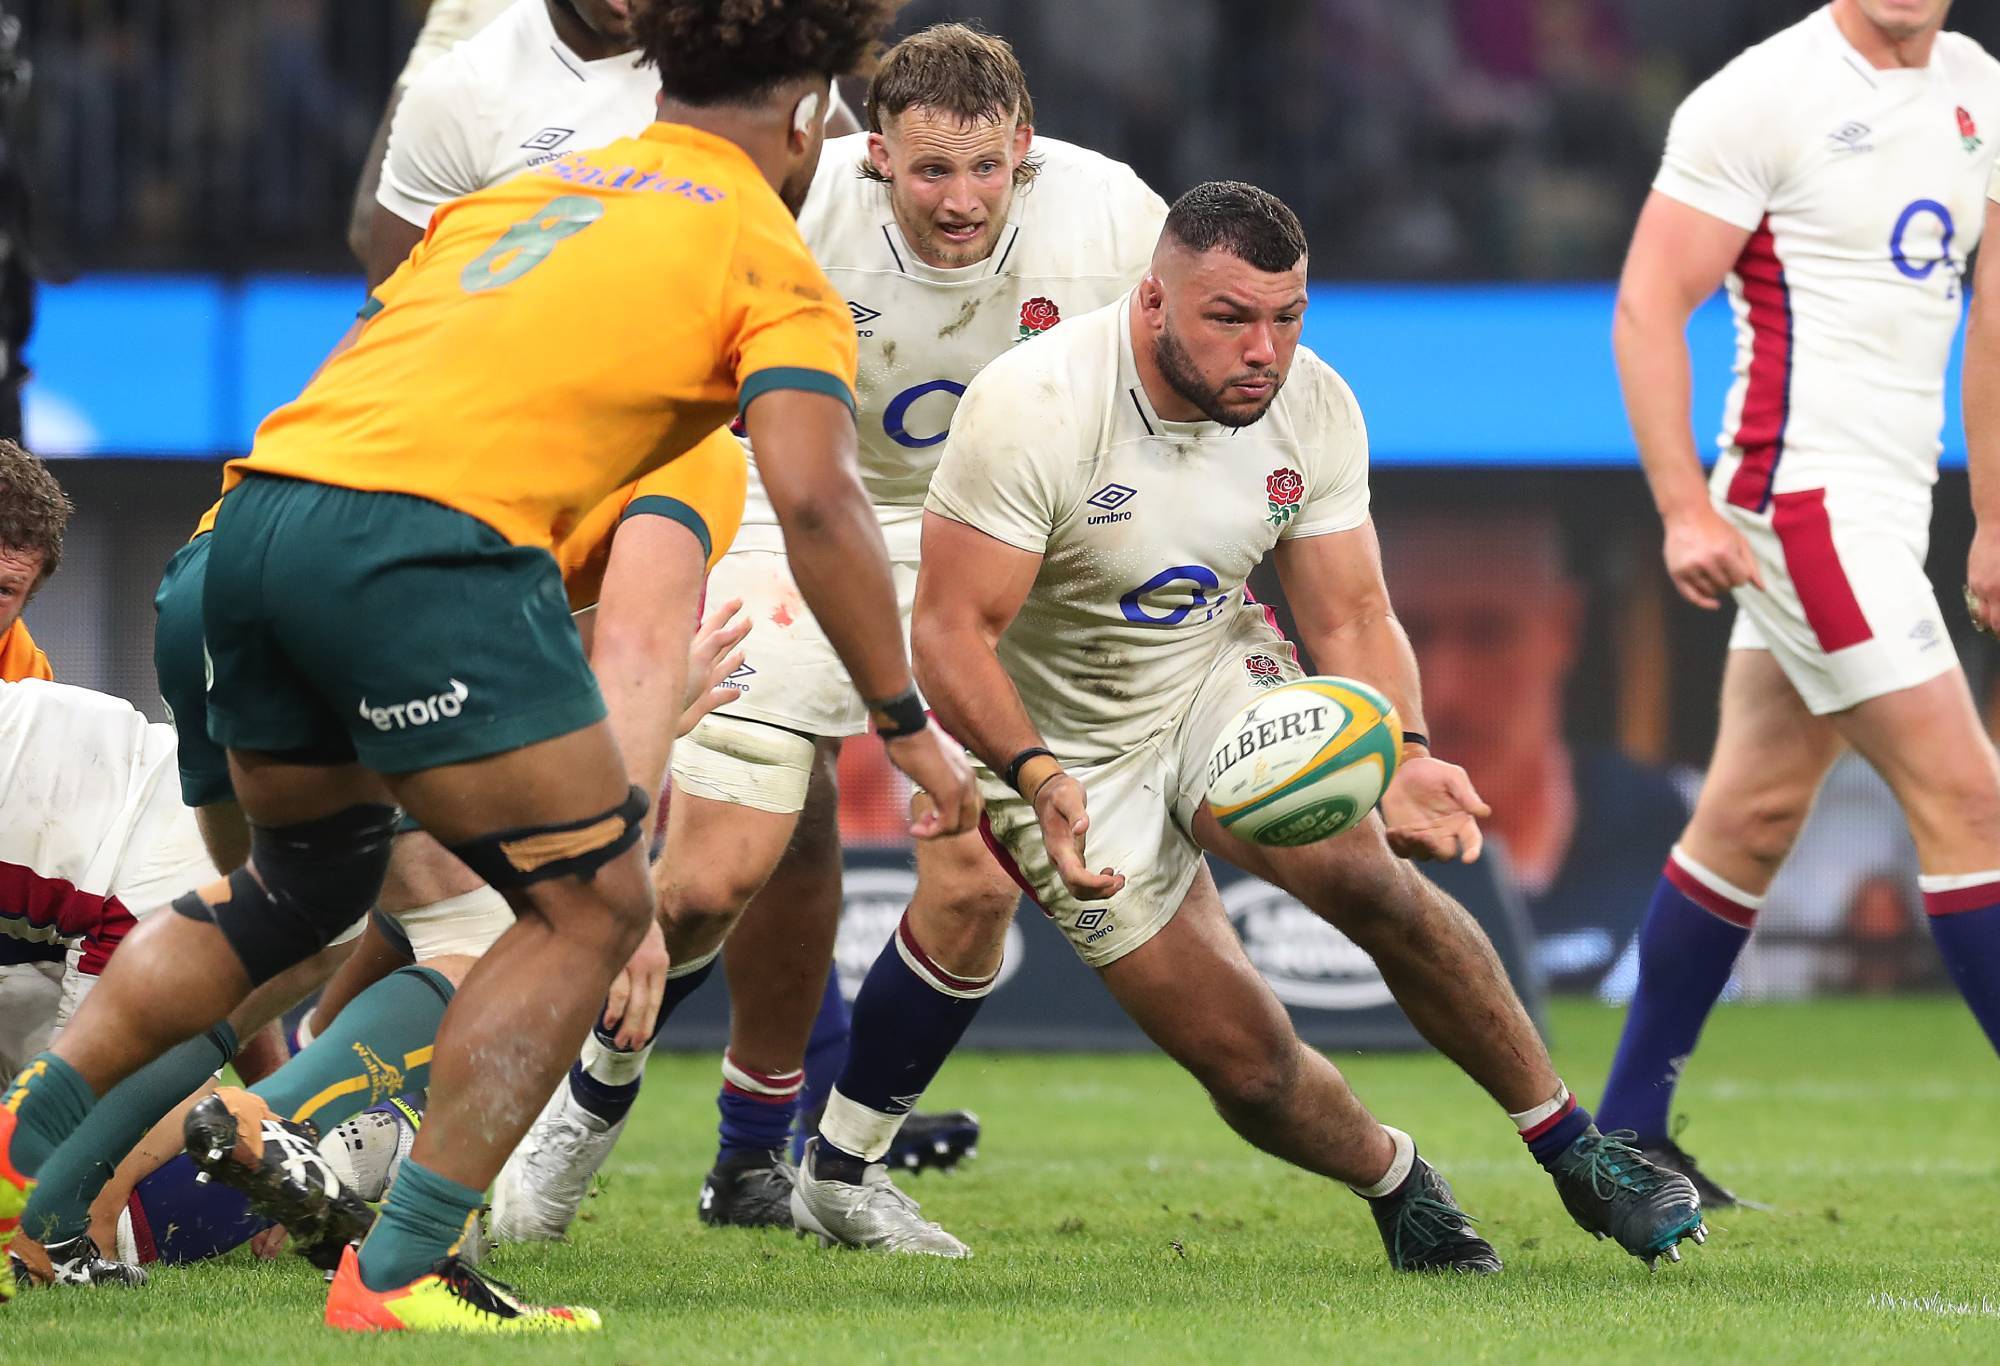 Ellis Genge of England passes the ball during game one of the international test match series between the Australian Wallabies and England at Optus Stadium on July 02, 2022 in Perth, Australia. (Photo by Will Russell - RFU/The RFU Collection via Getty Images)